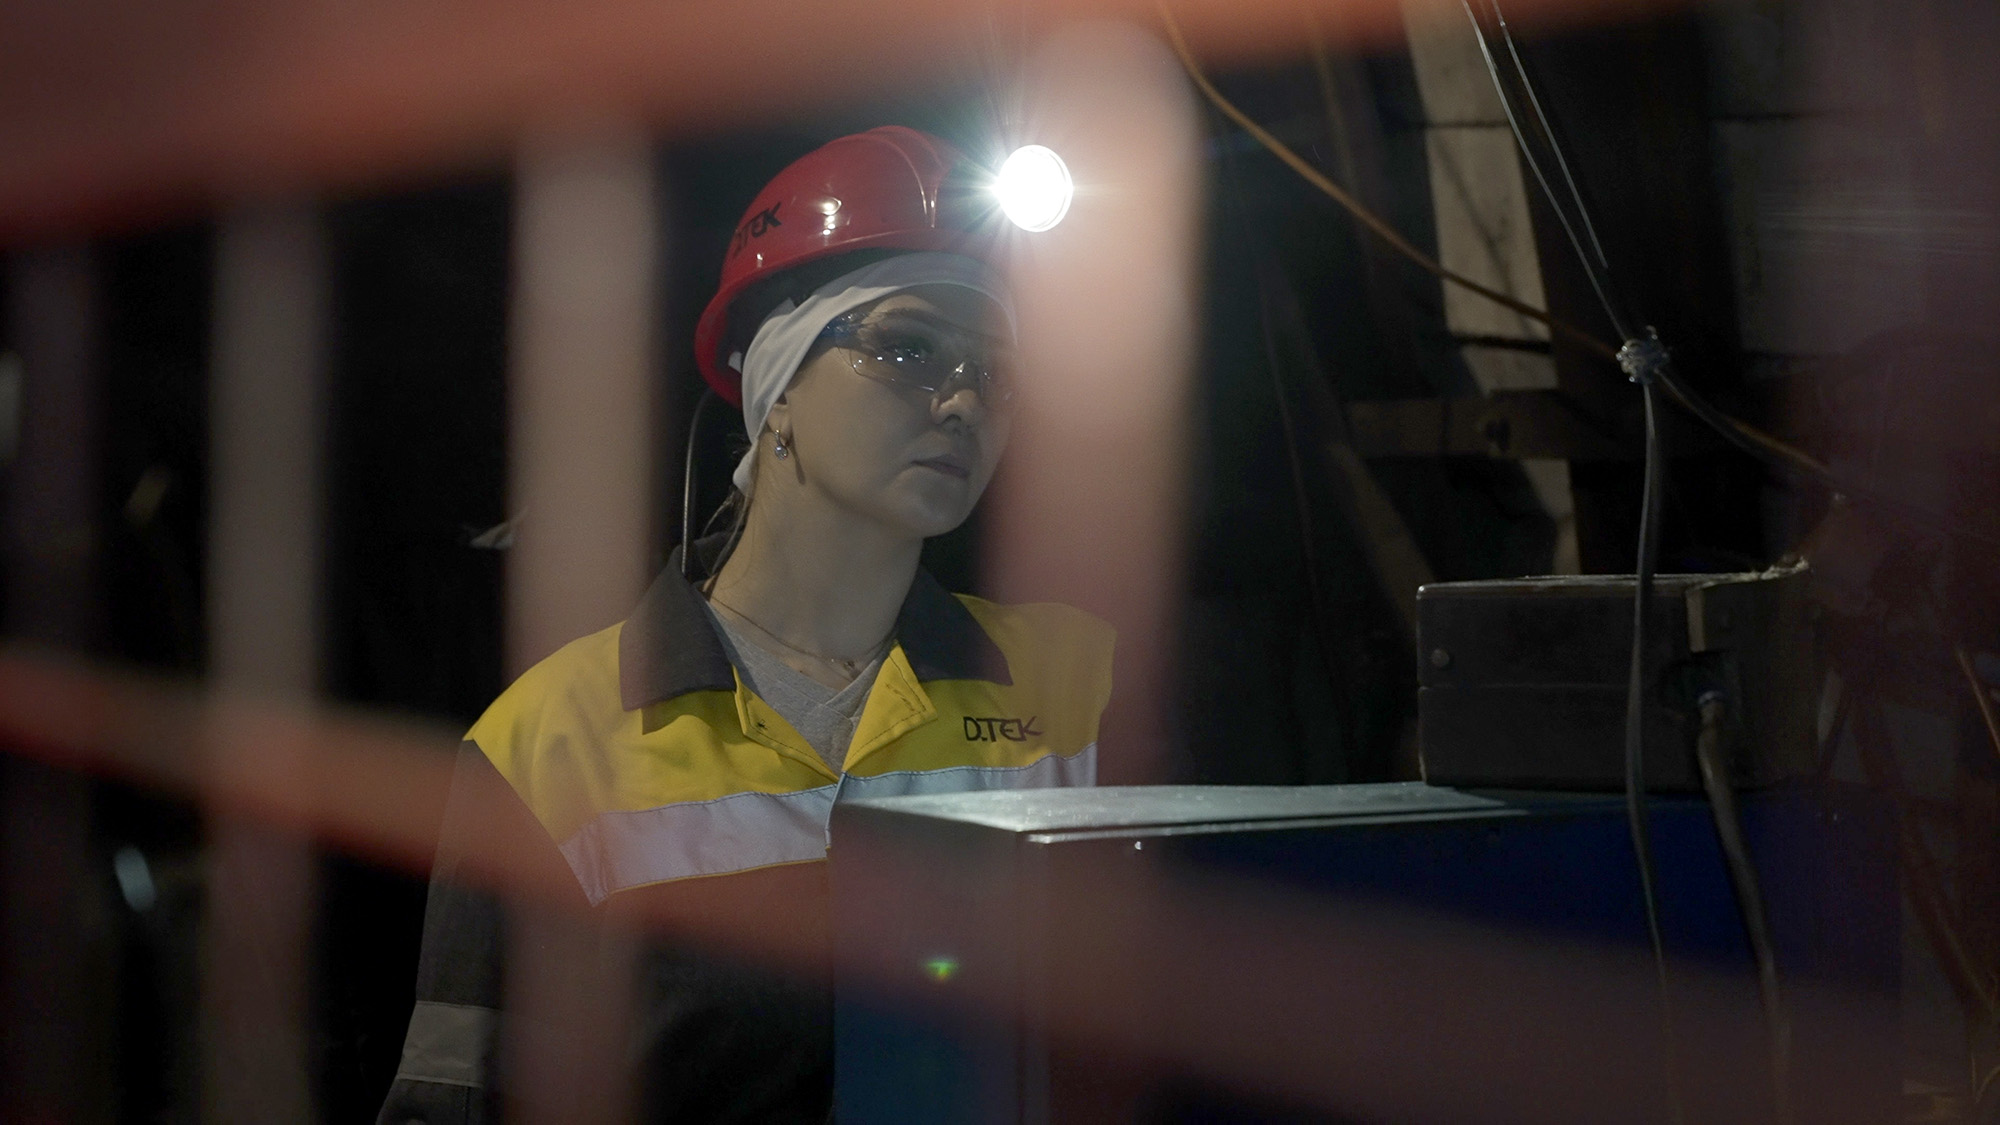 Tetiana descends from a family of coal miners dating back generations. She was one of the first to raise her hand when the mining company asked for female volunteers to work underground. 